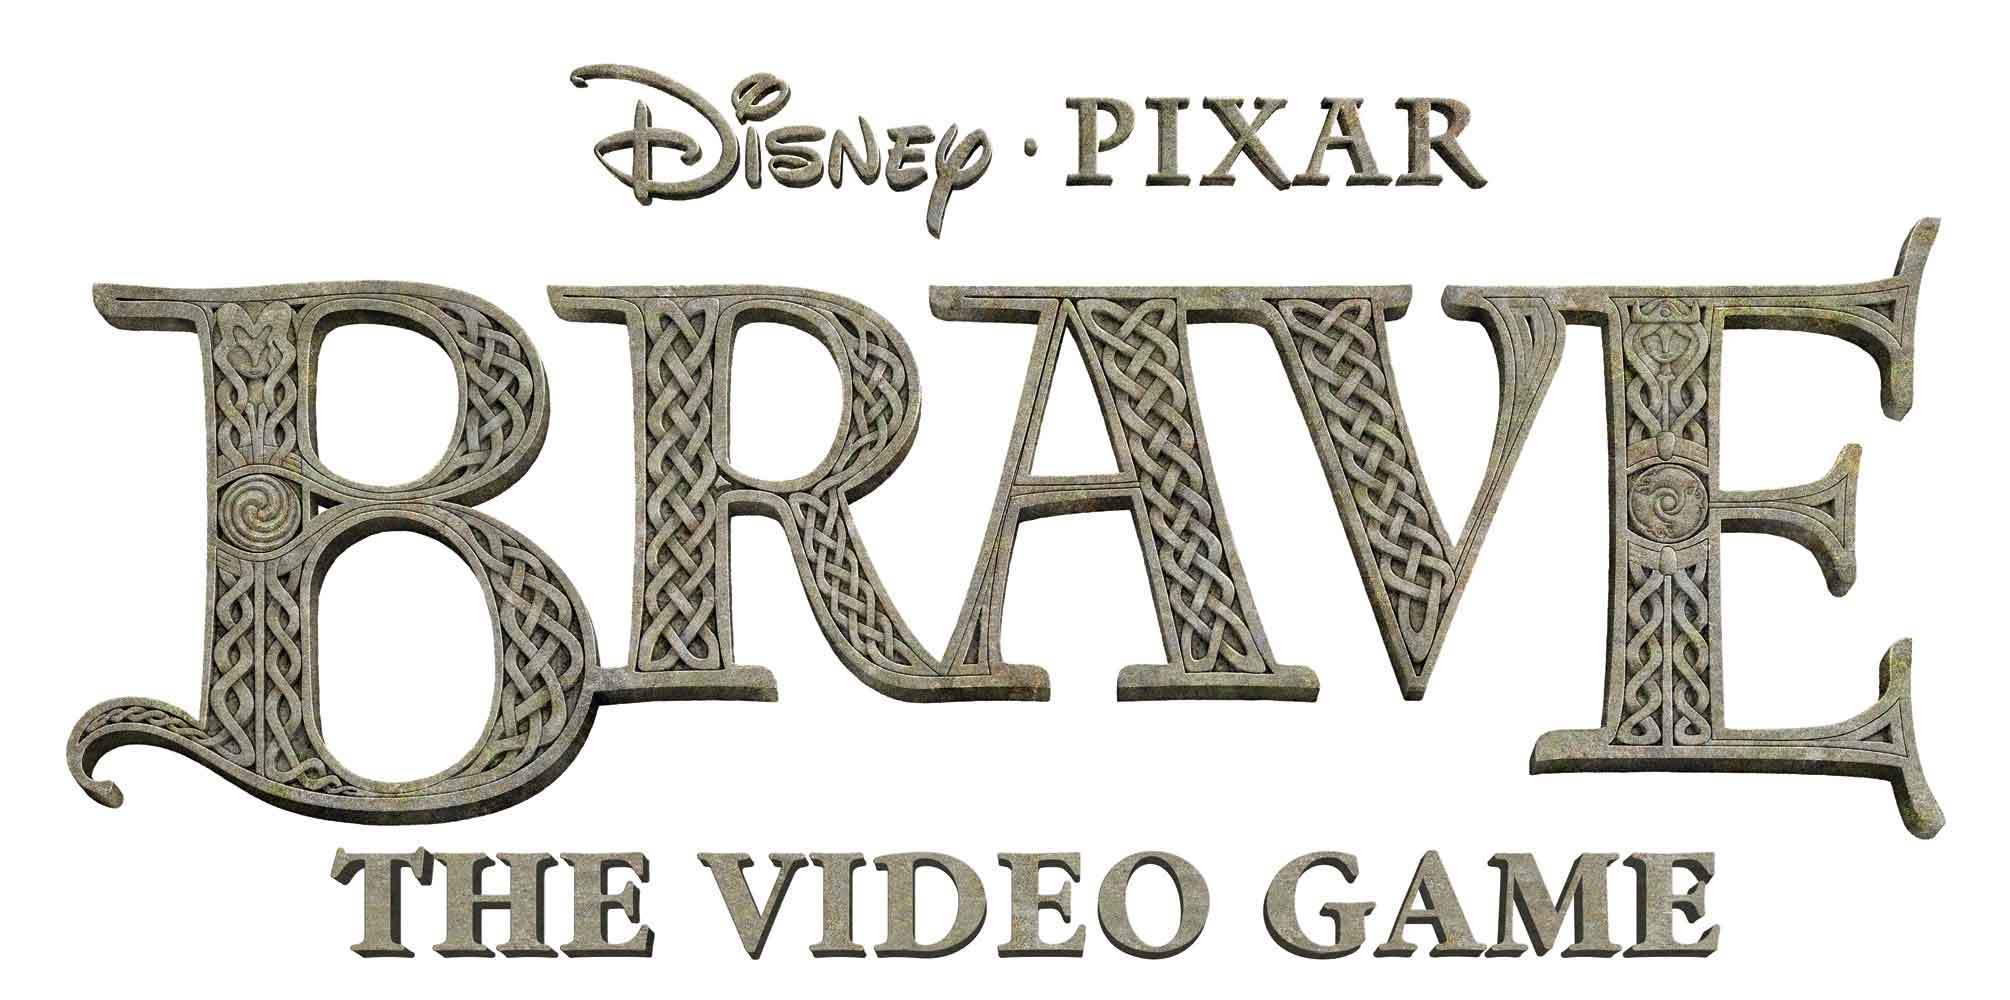 brave wii game